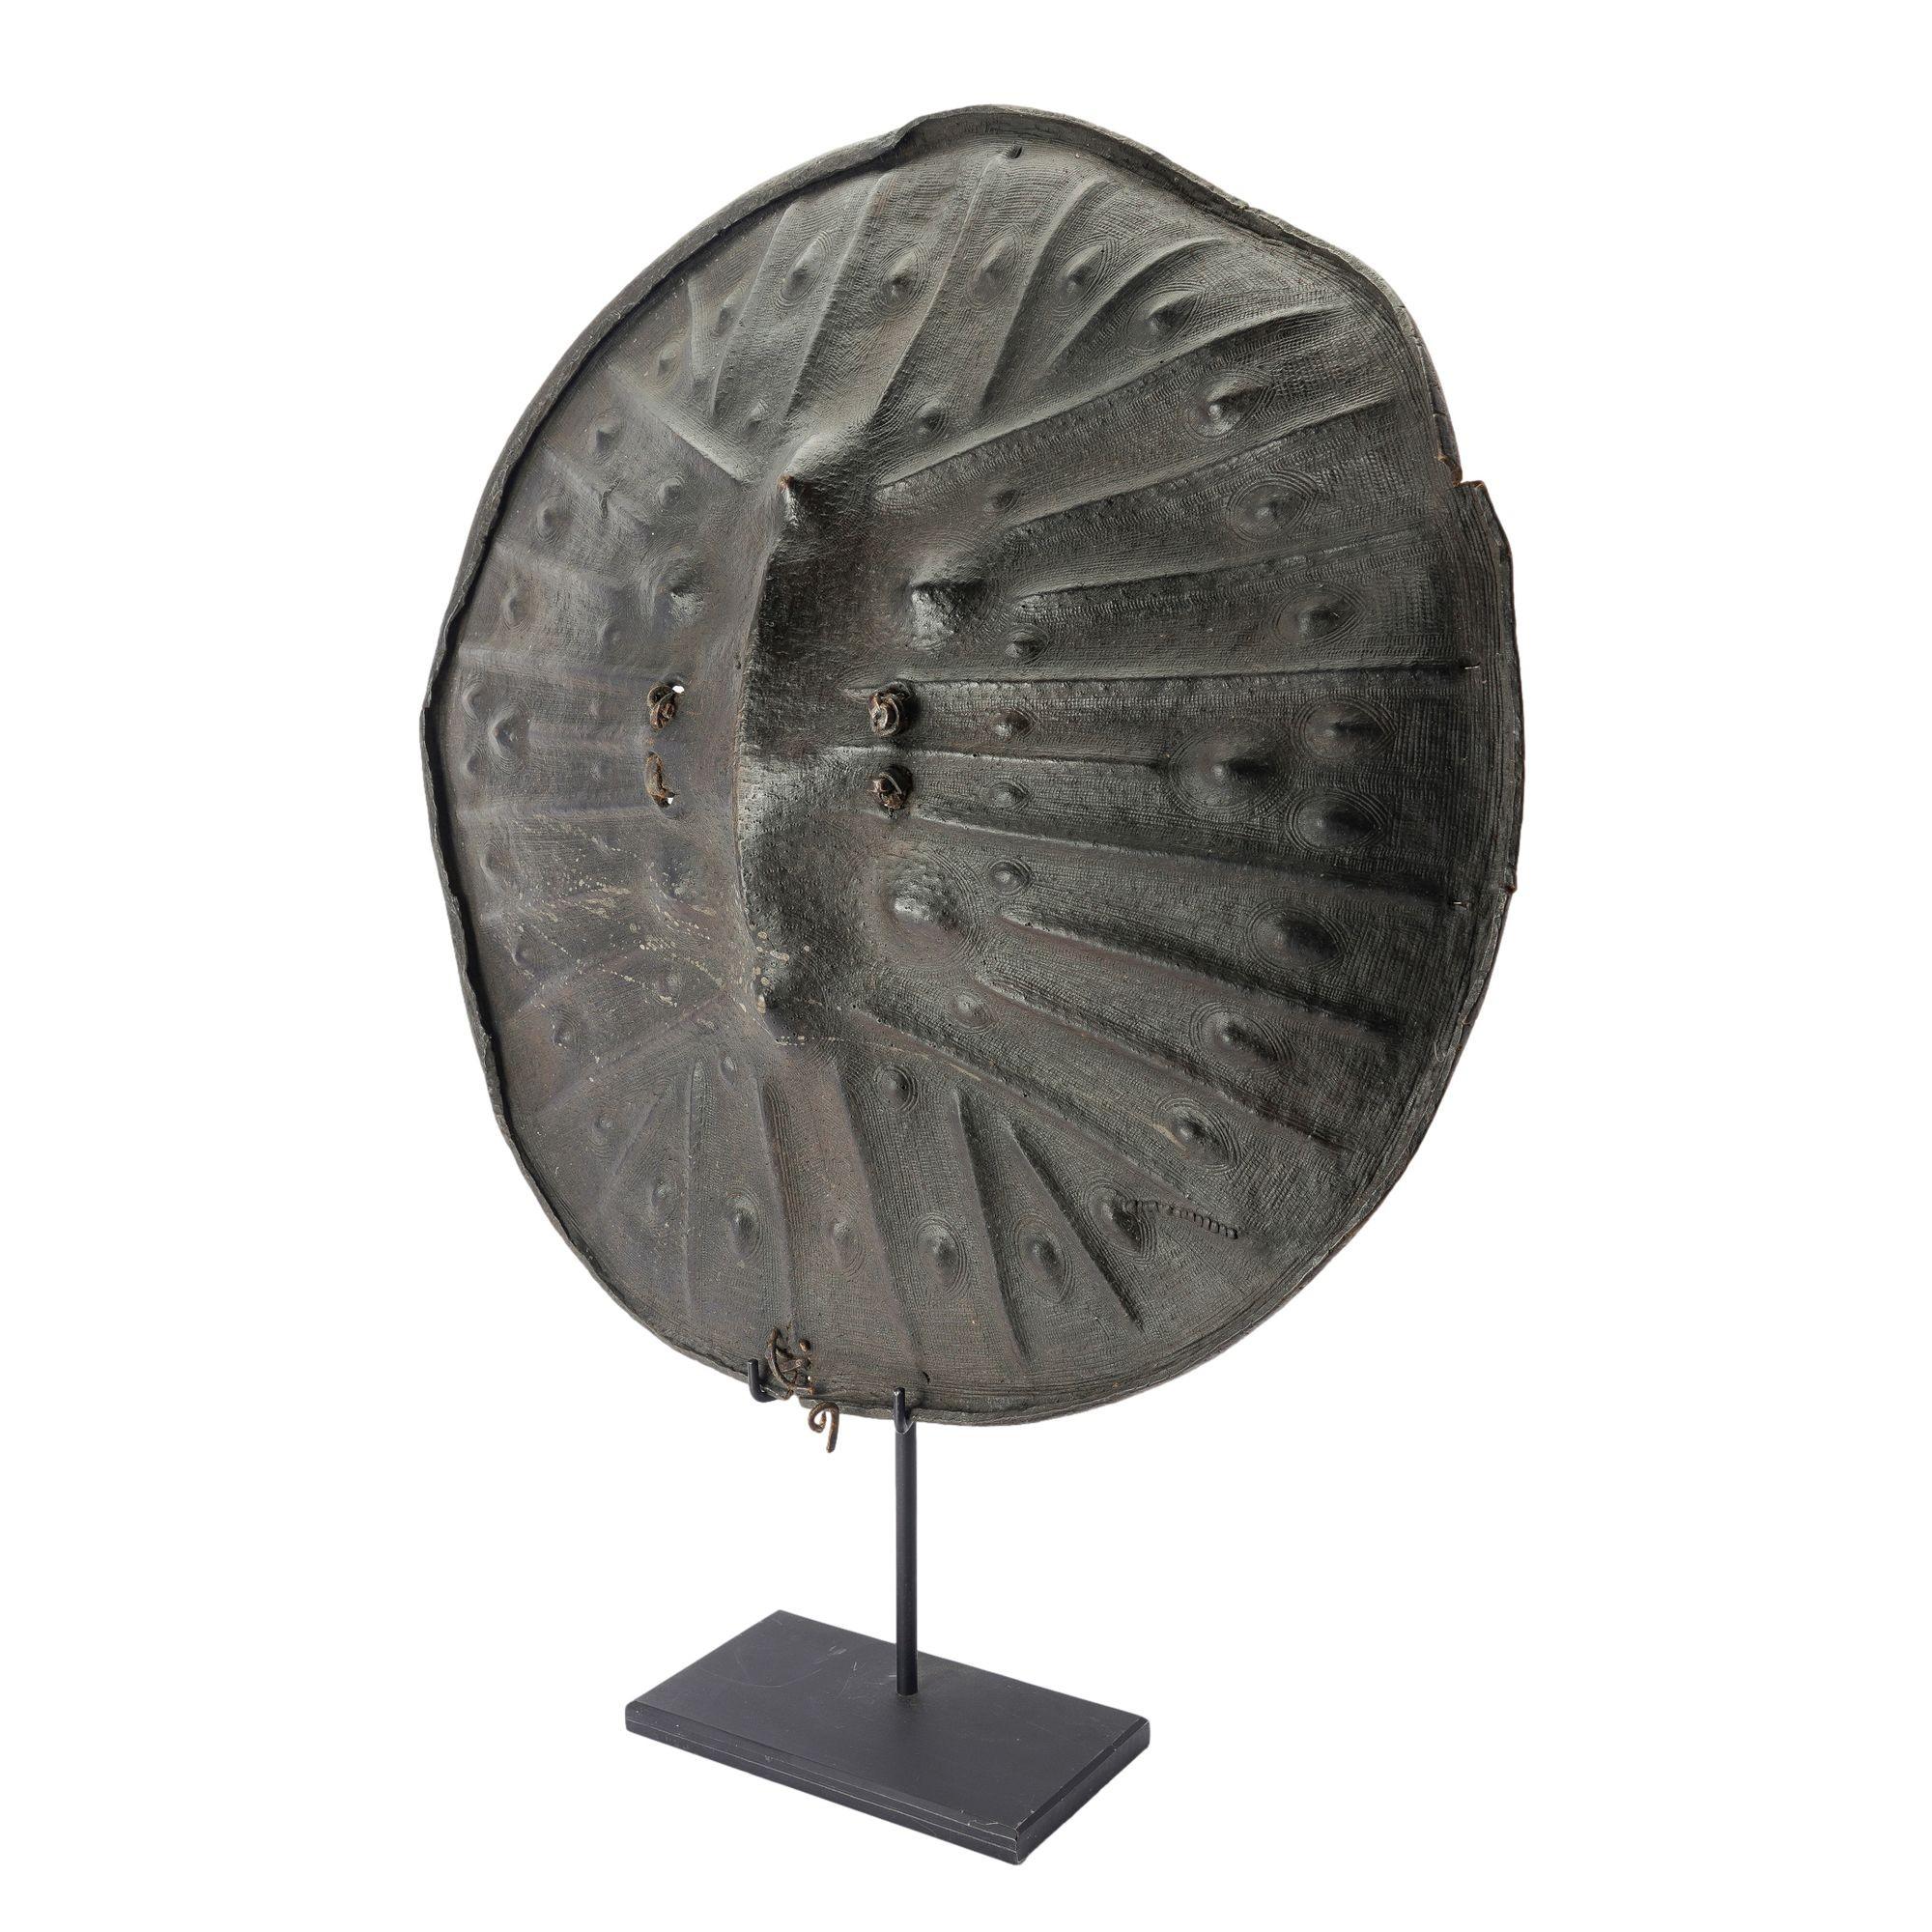 Ethiopian leather warrior's shield made of molded hippopotamus hide. Among the Oromo and Sidama peoples of southern Ethiopia, hide-covered shields connote the courage of warriors and are important insignias of manhood. Such shields are often made of